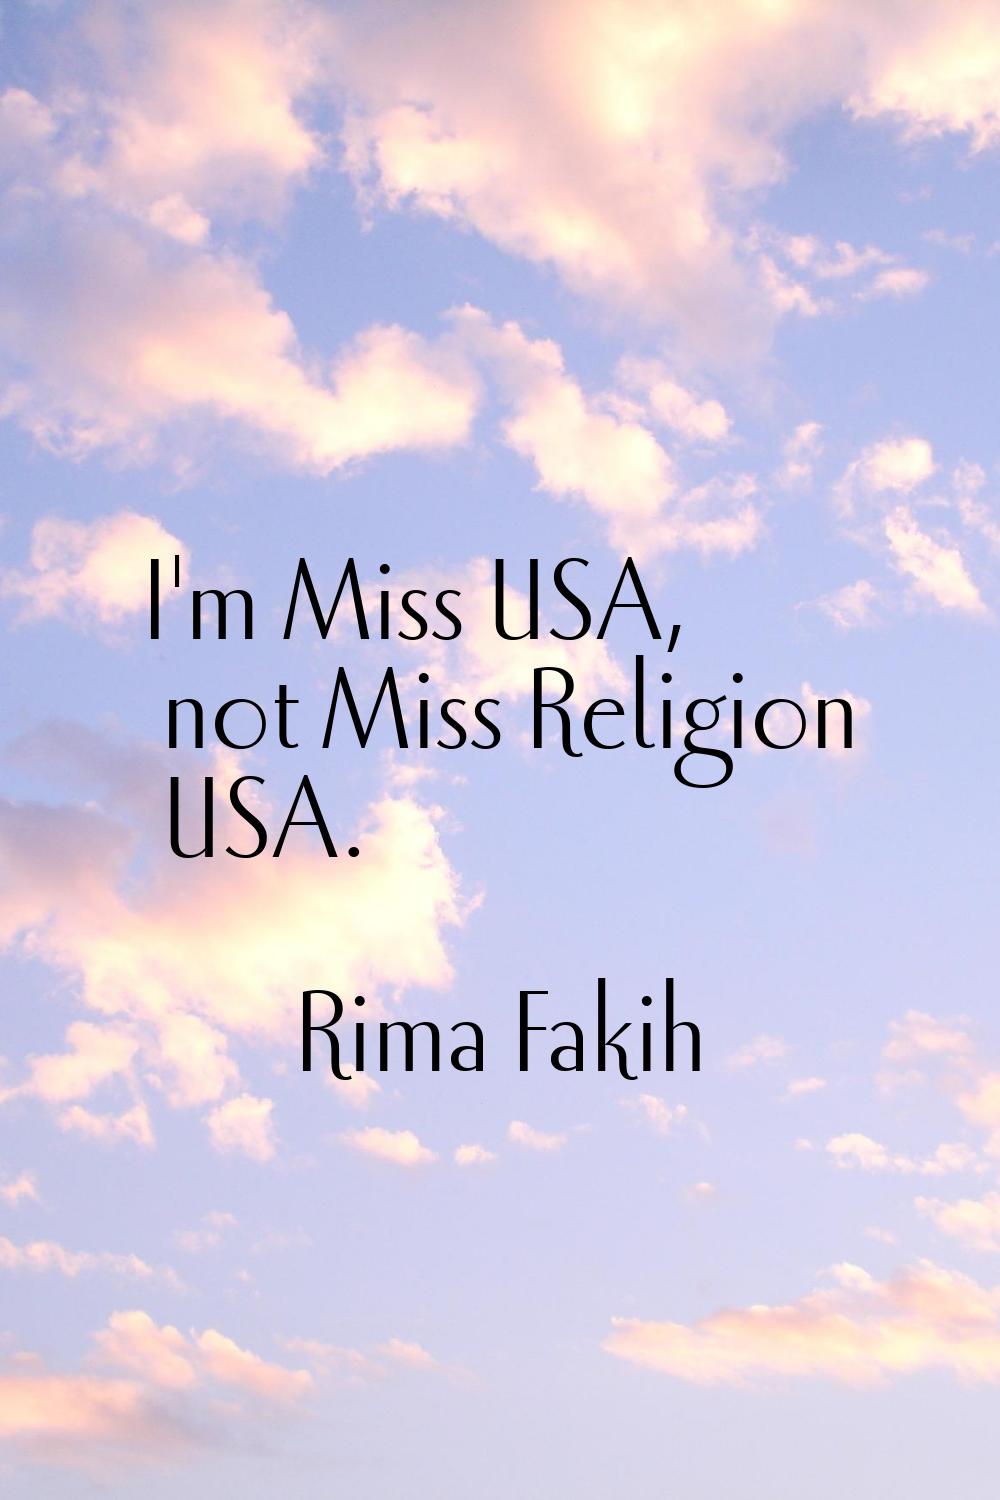 I'm Miss USA, not Miss Religion USA.